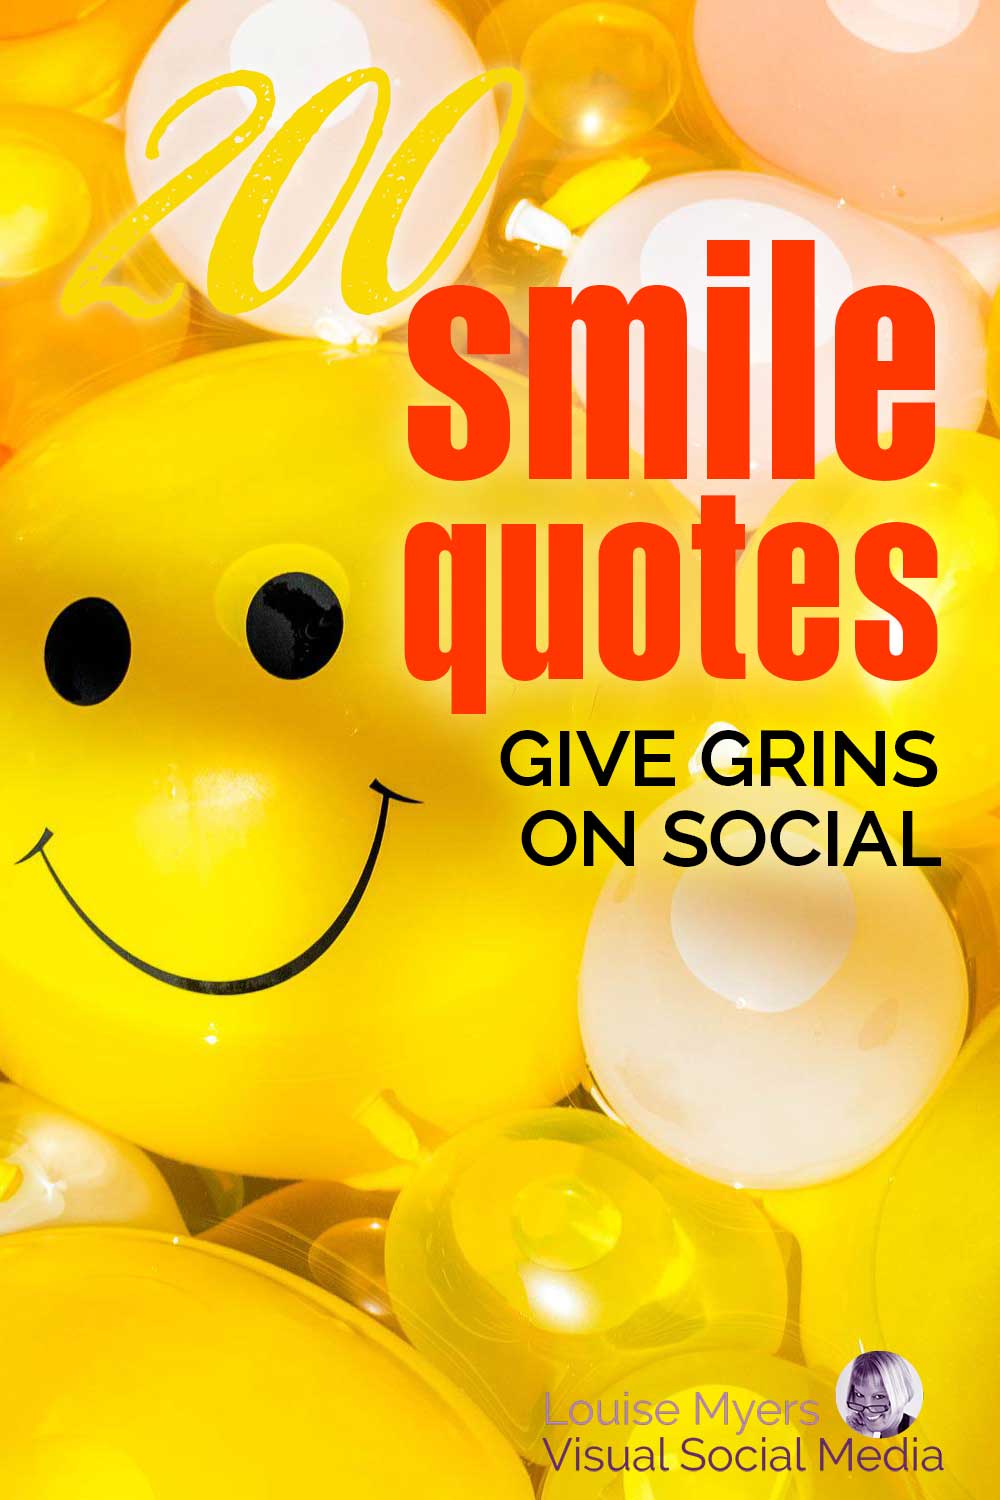 yellow balloons with big smiley face says 200 smile quotes to give grins on social.